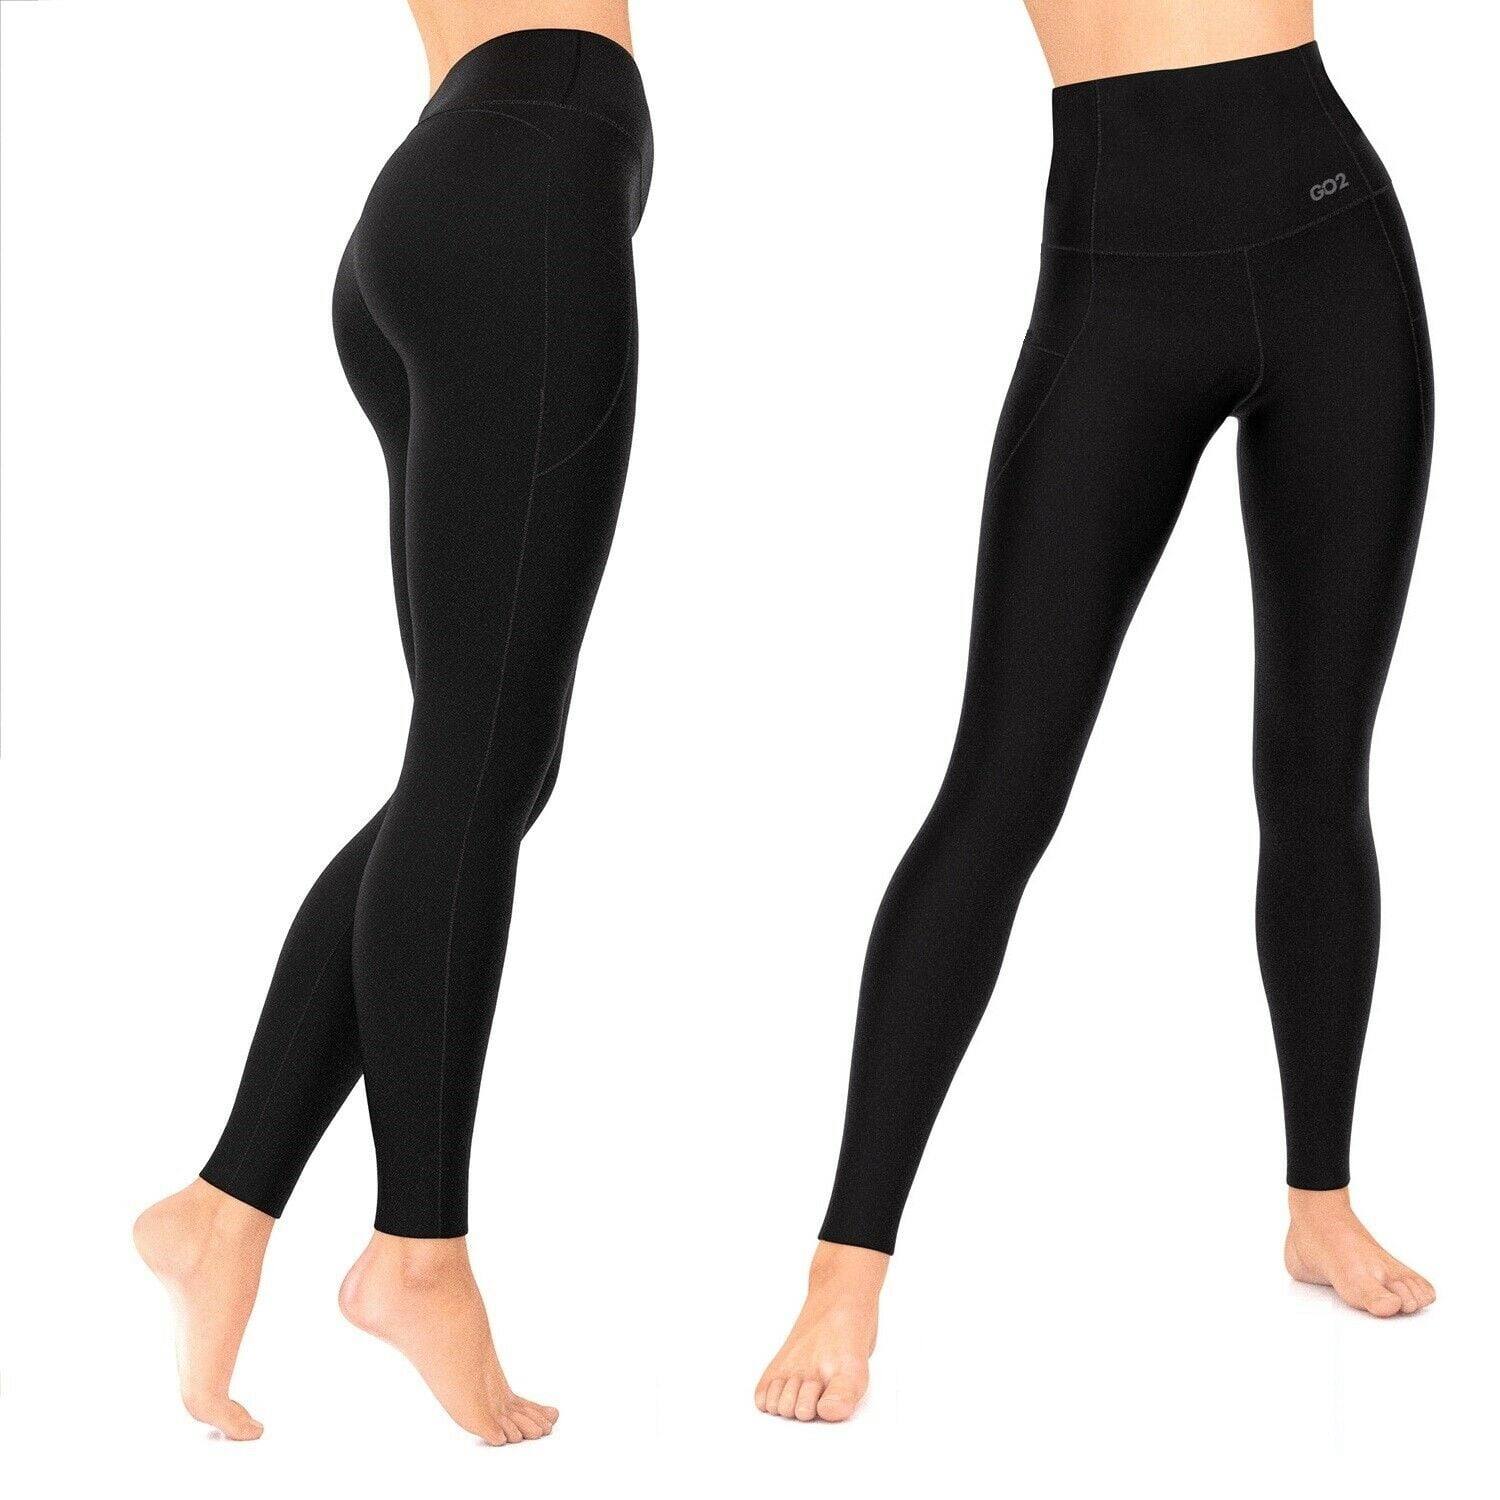 Go2 Compression Leggings Womens Black High Waist with Tummy Control and  Pocket (Navy Blue,Small) 